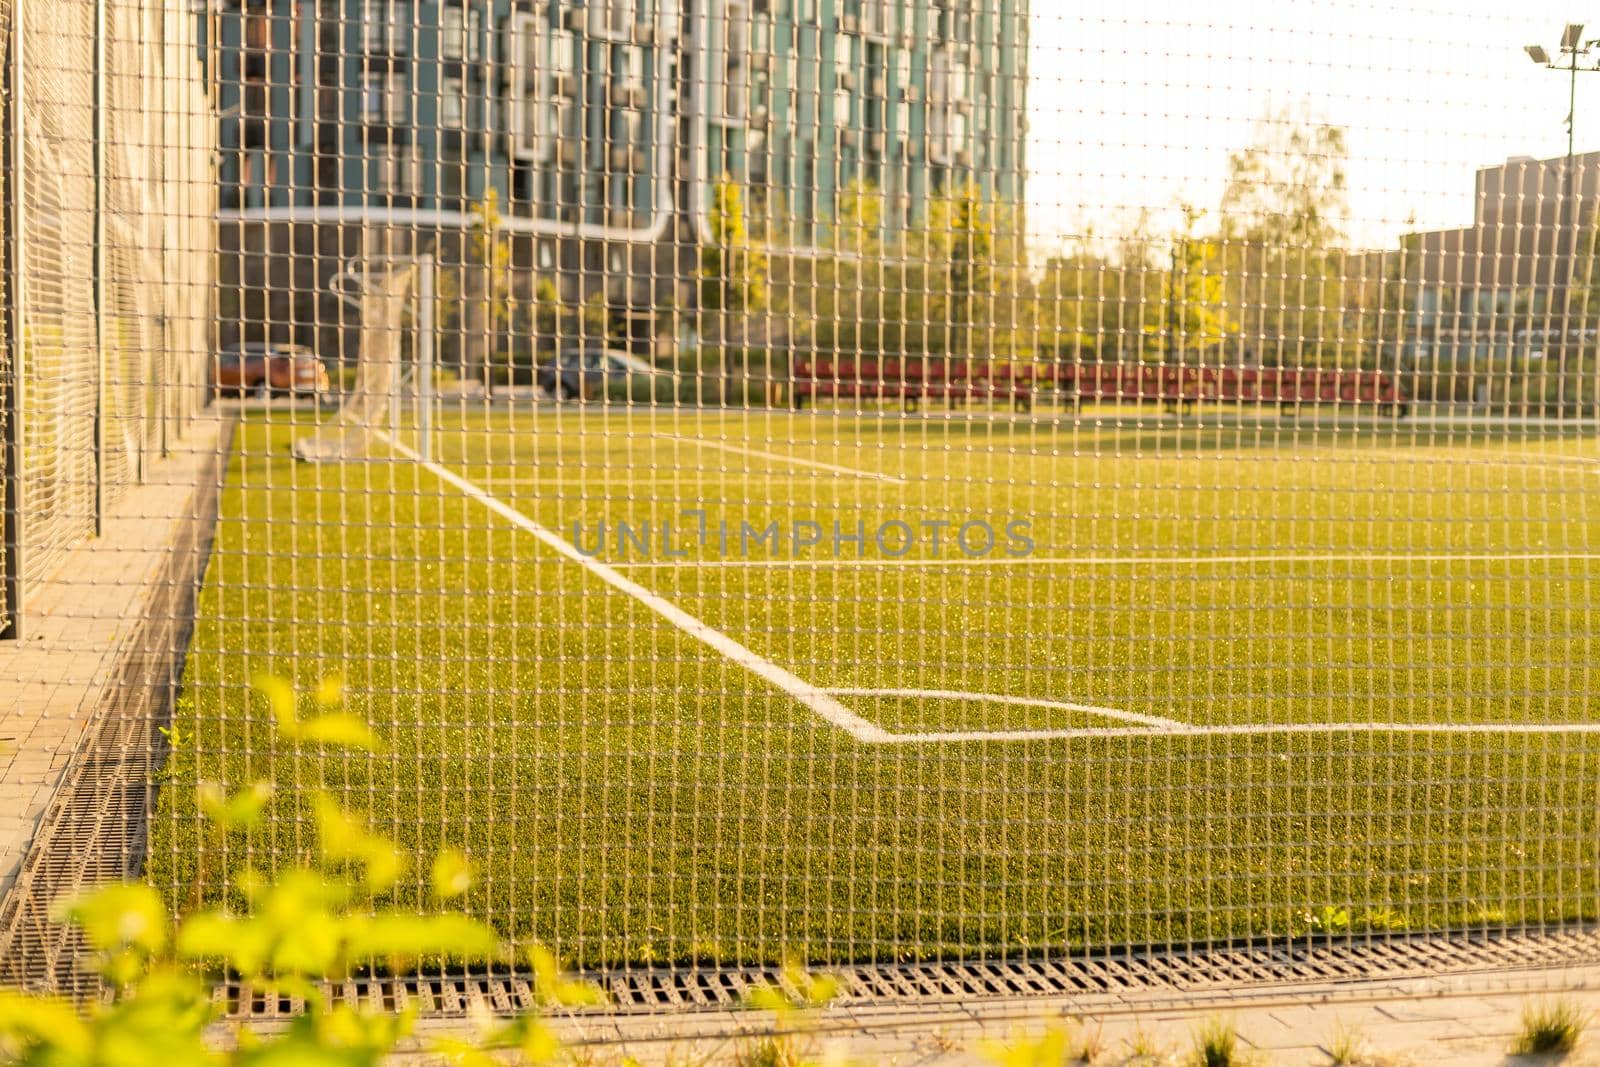 Soccer or football net background, view from behind the goal with blurred stadium and field pitch.